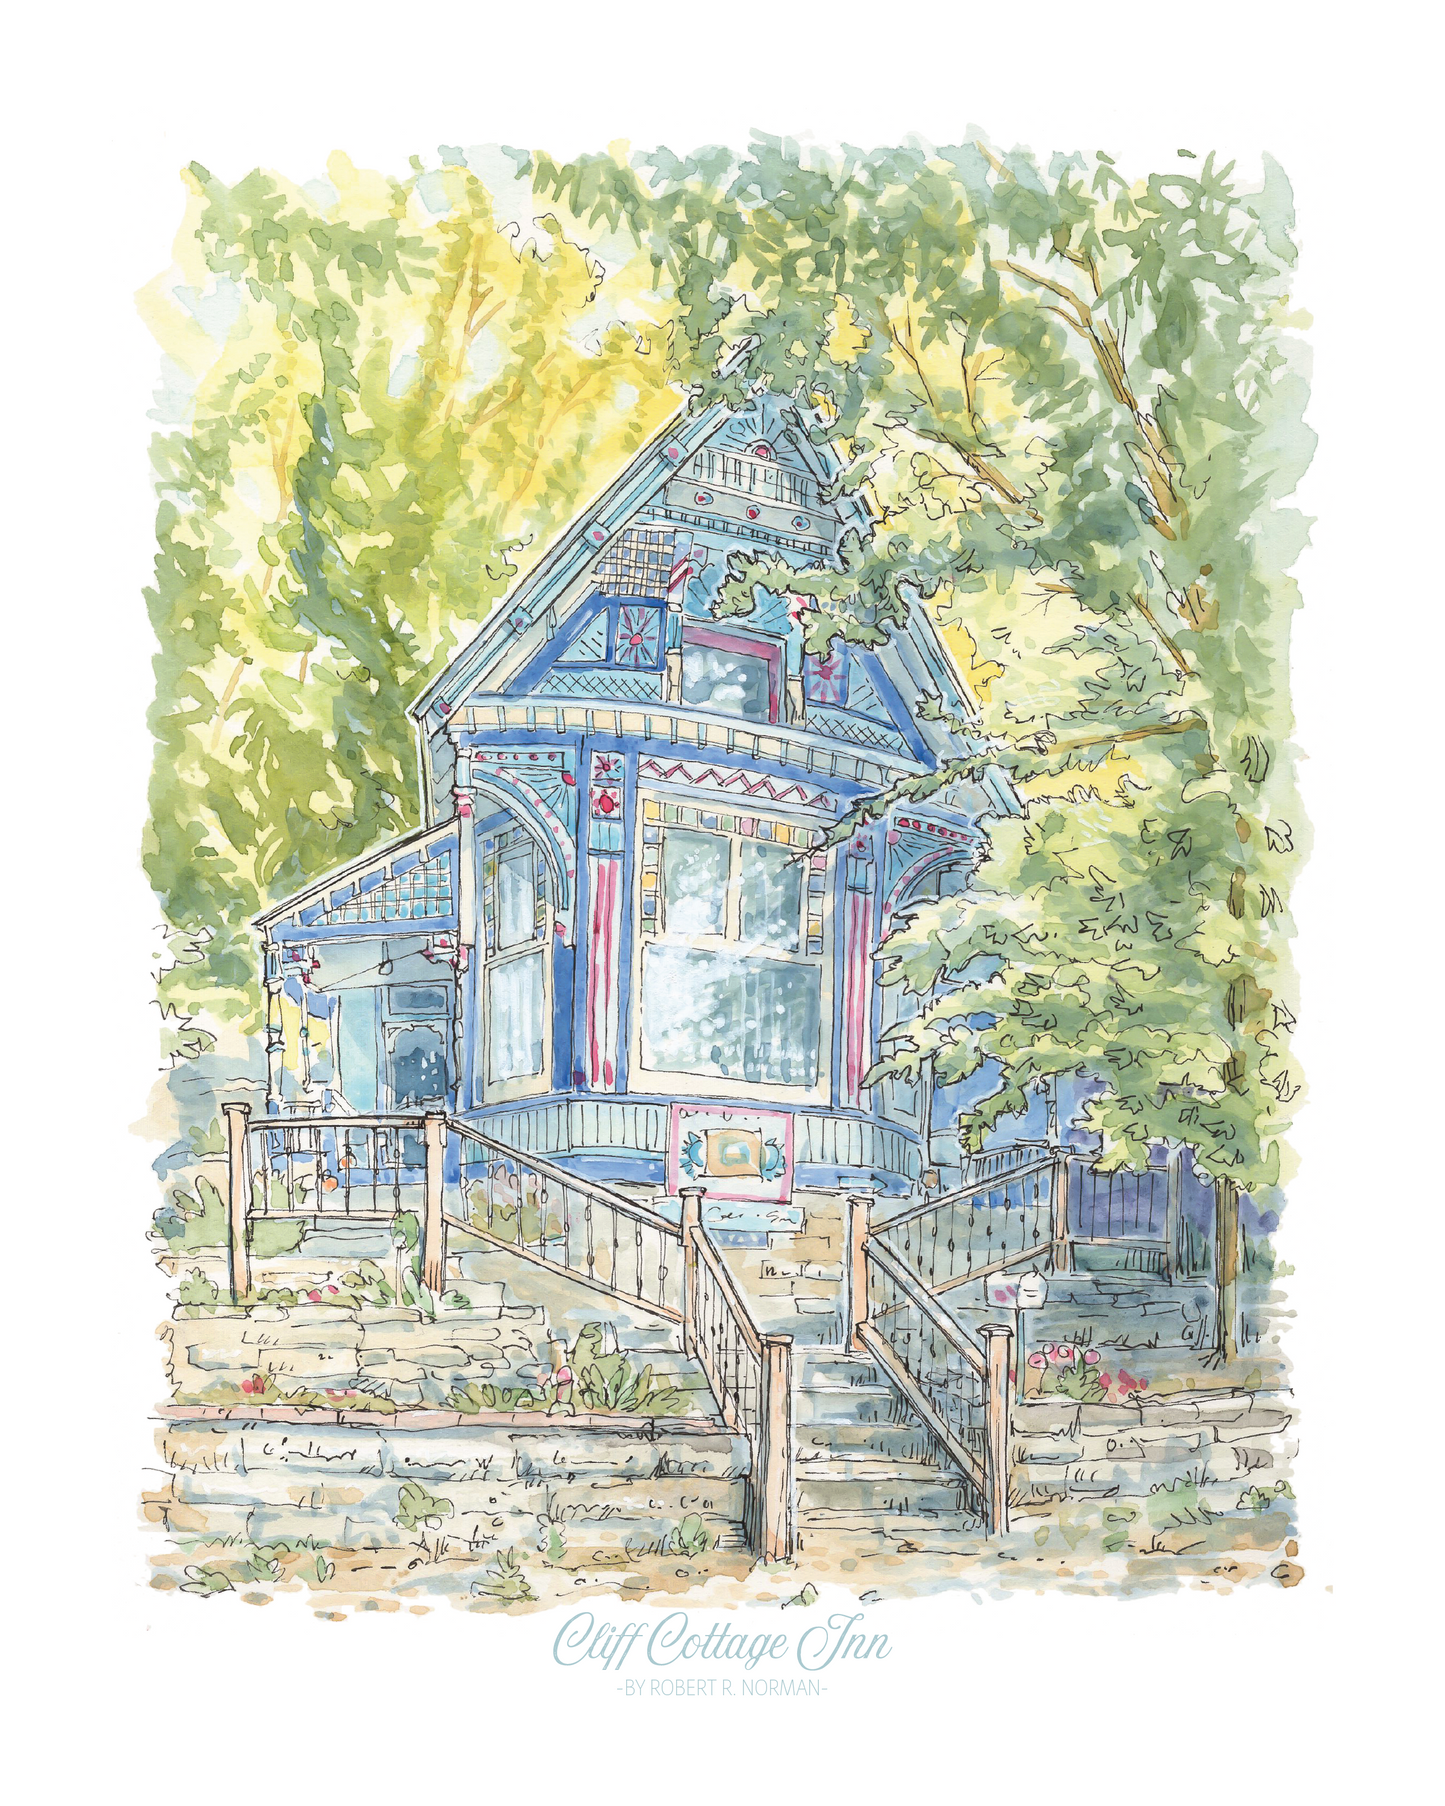 Cliff Cottage Inn of Eureka Springs Arkansas - Signed Open Edition Print by Robert R Norman